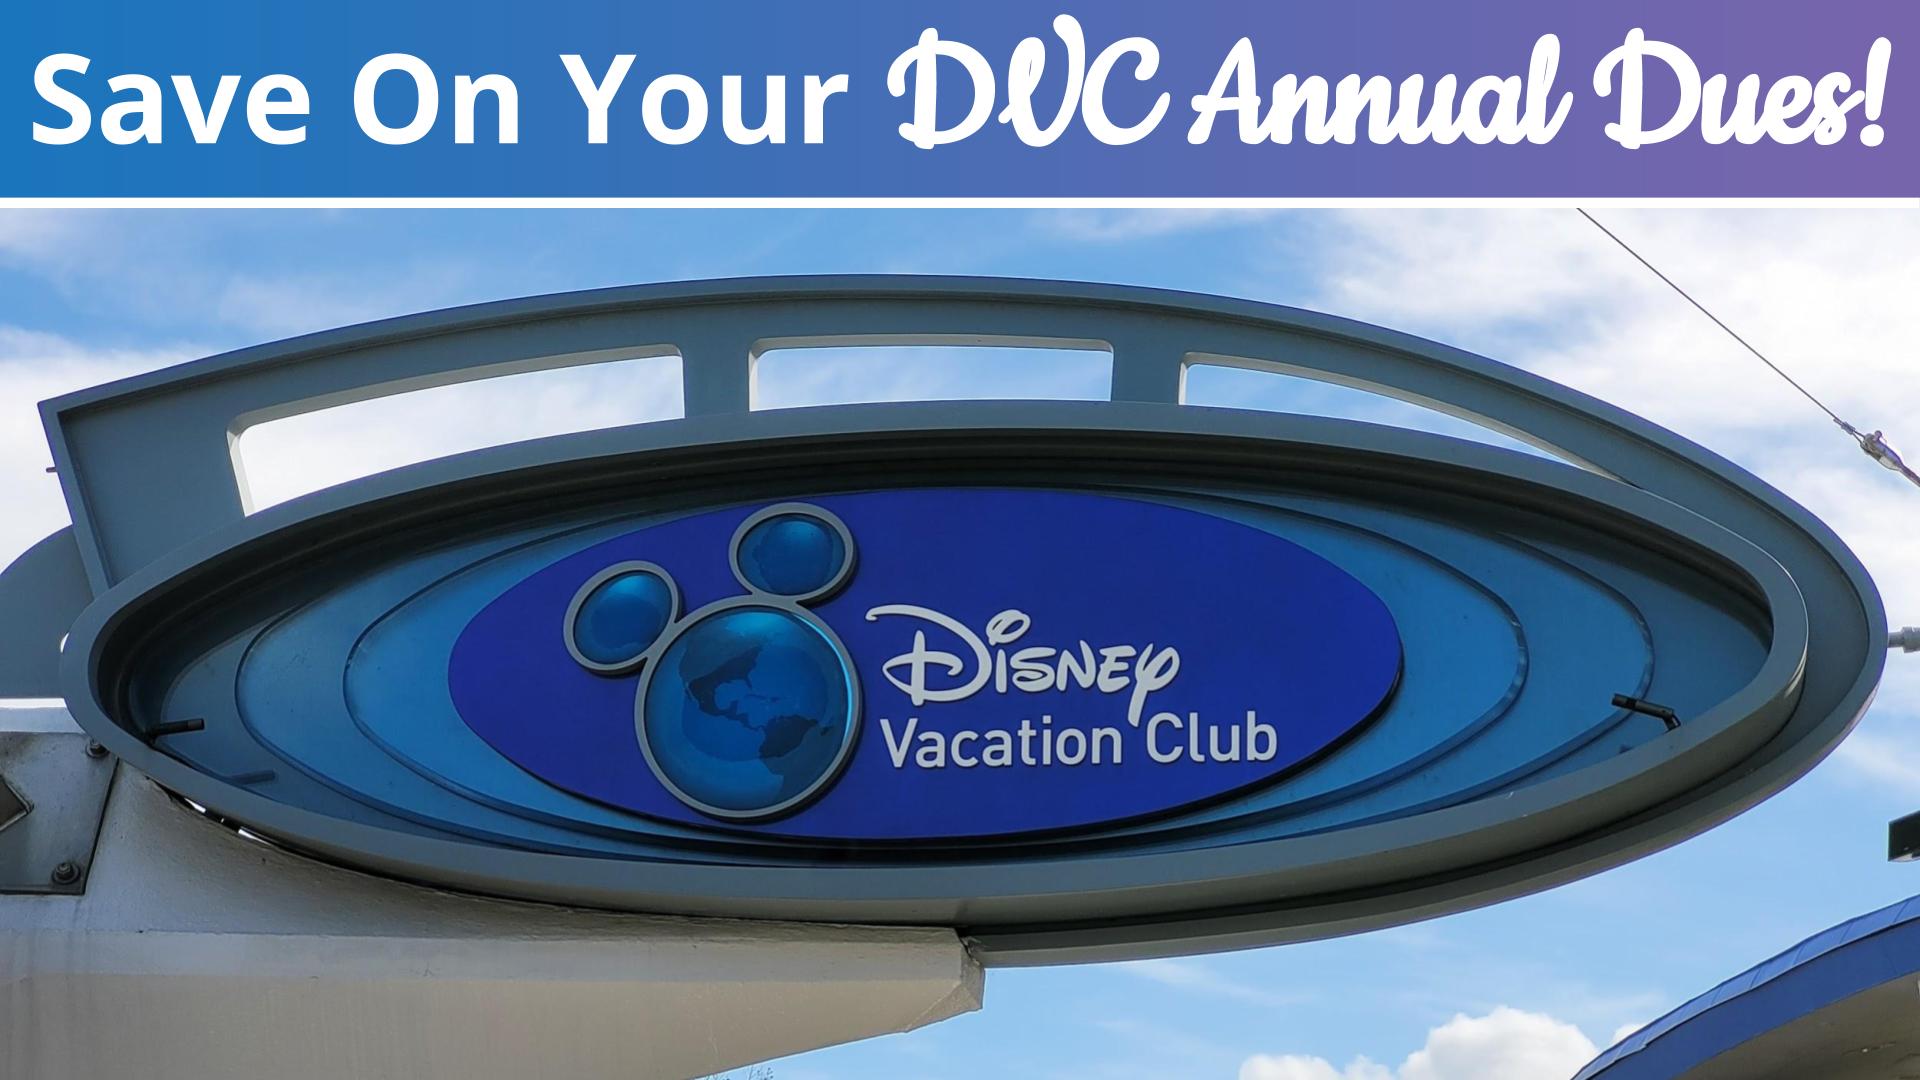 Pay DVC Annual Dues with Discounted Disney Gift Cards